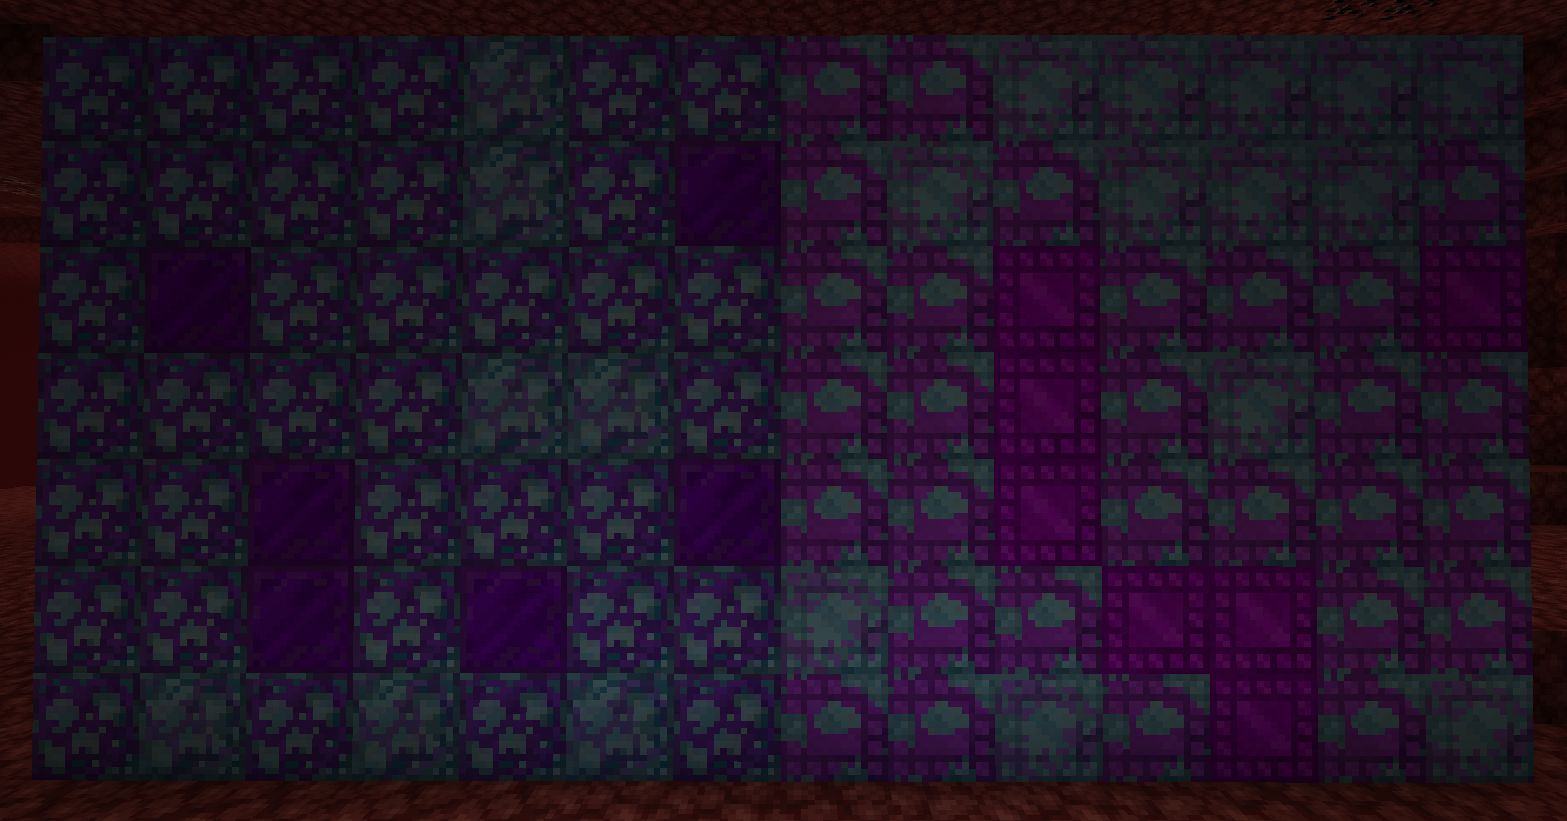 An image showing a 14x7 wall of verbo blocks. The left half of the wall is uncut verbo, and the right half is cut verbo. Most of the blocks are lightly nitrogenized, however some blocks are semi-nitrogenized. There is a large cluster of semi-nitrogenized blocks at the top right corner. There are no fully nitrogenized blocks. For each semi-nitrogenized block, every verbo block that it is touching is either semi-nitrogenized or lightly nitrogenized. This demonstrates that in order for verbo for nitrogenize, none of the blocks adjacent to it can be at a lower level of nitrogenization than it.